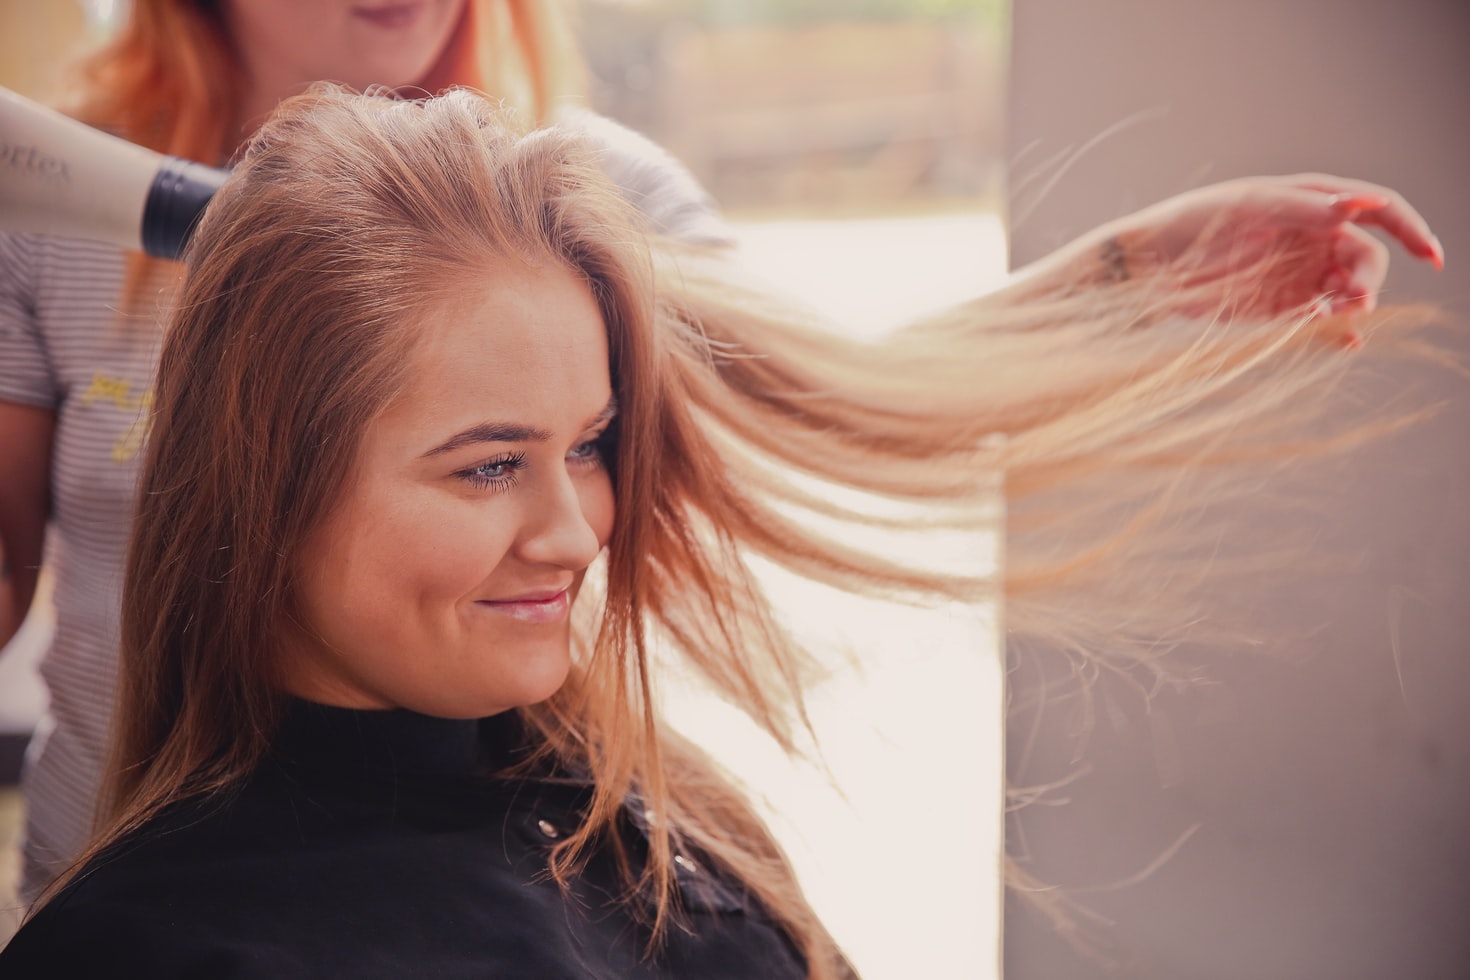 Tips for hairstylists to use a portable hair dryer to give remarkable client services